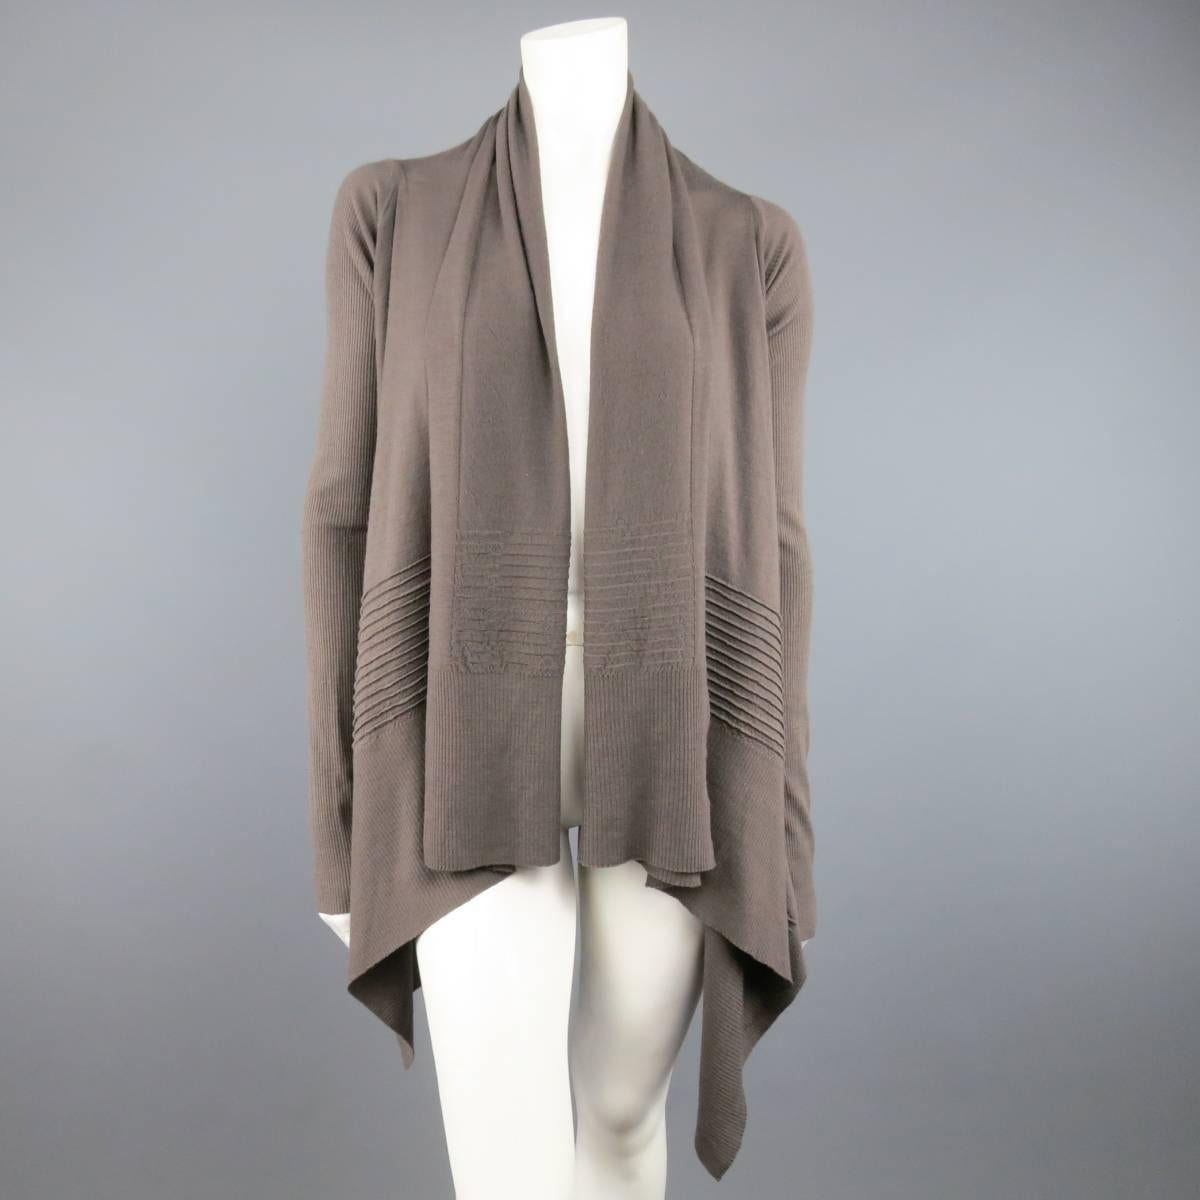 RICK OWENS taupe knitted cardigan features a shawl collar, open front, ribbed details and ribbed long sleeves. S/S 2013 Collection. Good Pre-Owned Condition.
Marked: Missing size tag.
 
Measurements:
Shoulders: 16.5 In.
Sleeve: 29.5 In.
Length: 29